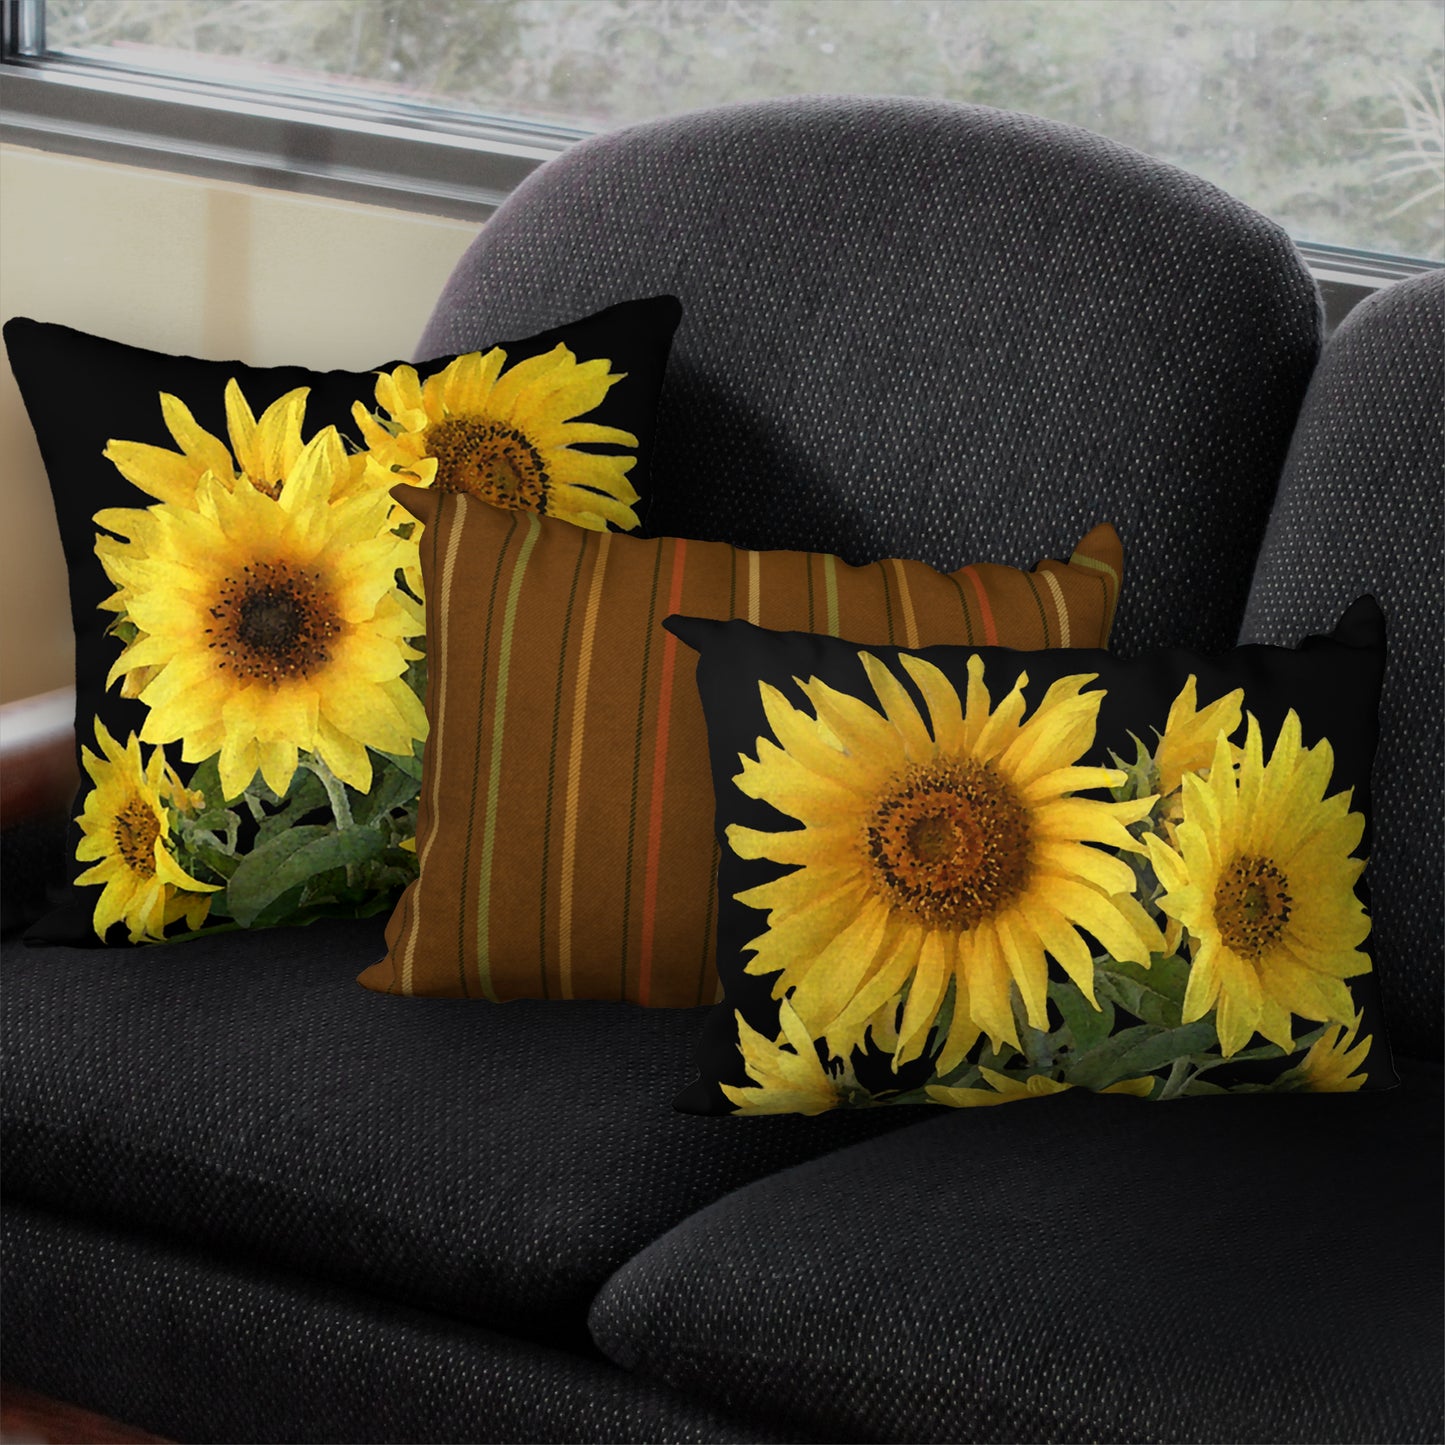 Set of 2 Sunflowers on Black Designer Pillows, 20"x14" and 18"x18"